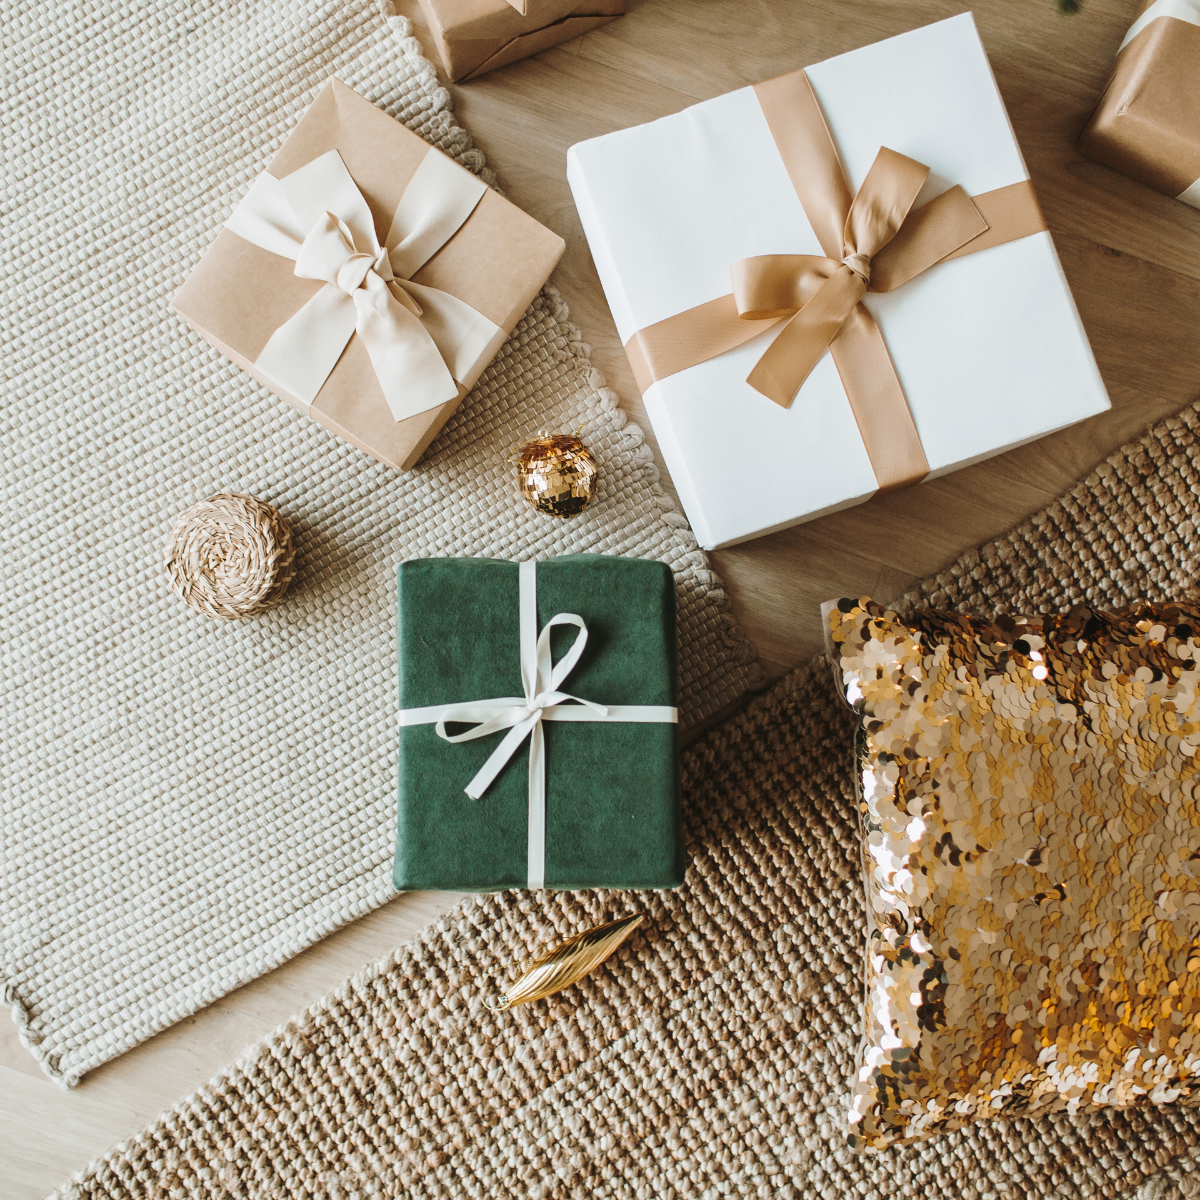 Amazing sustainable Christmas gifts from independent shops